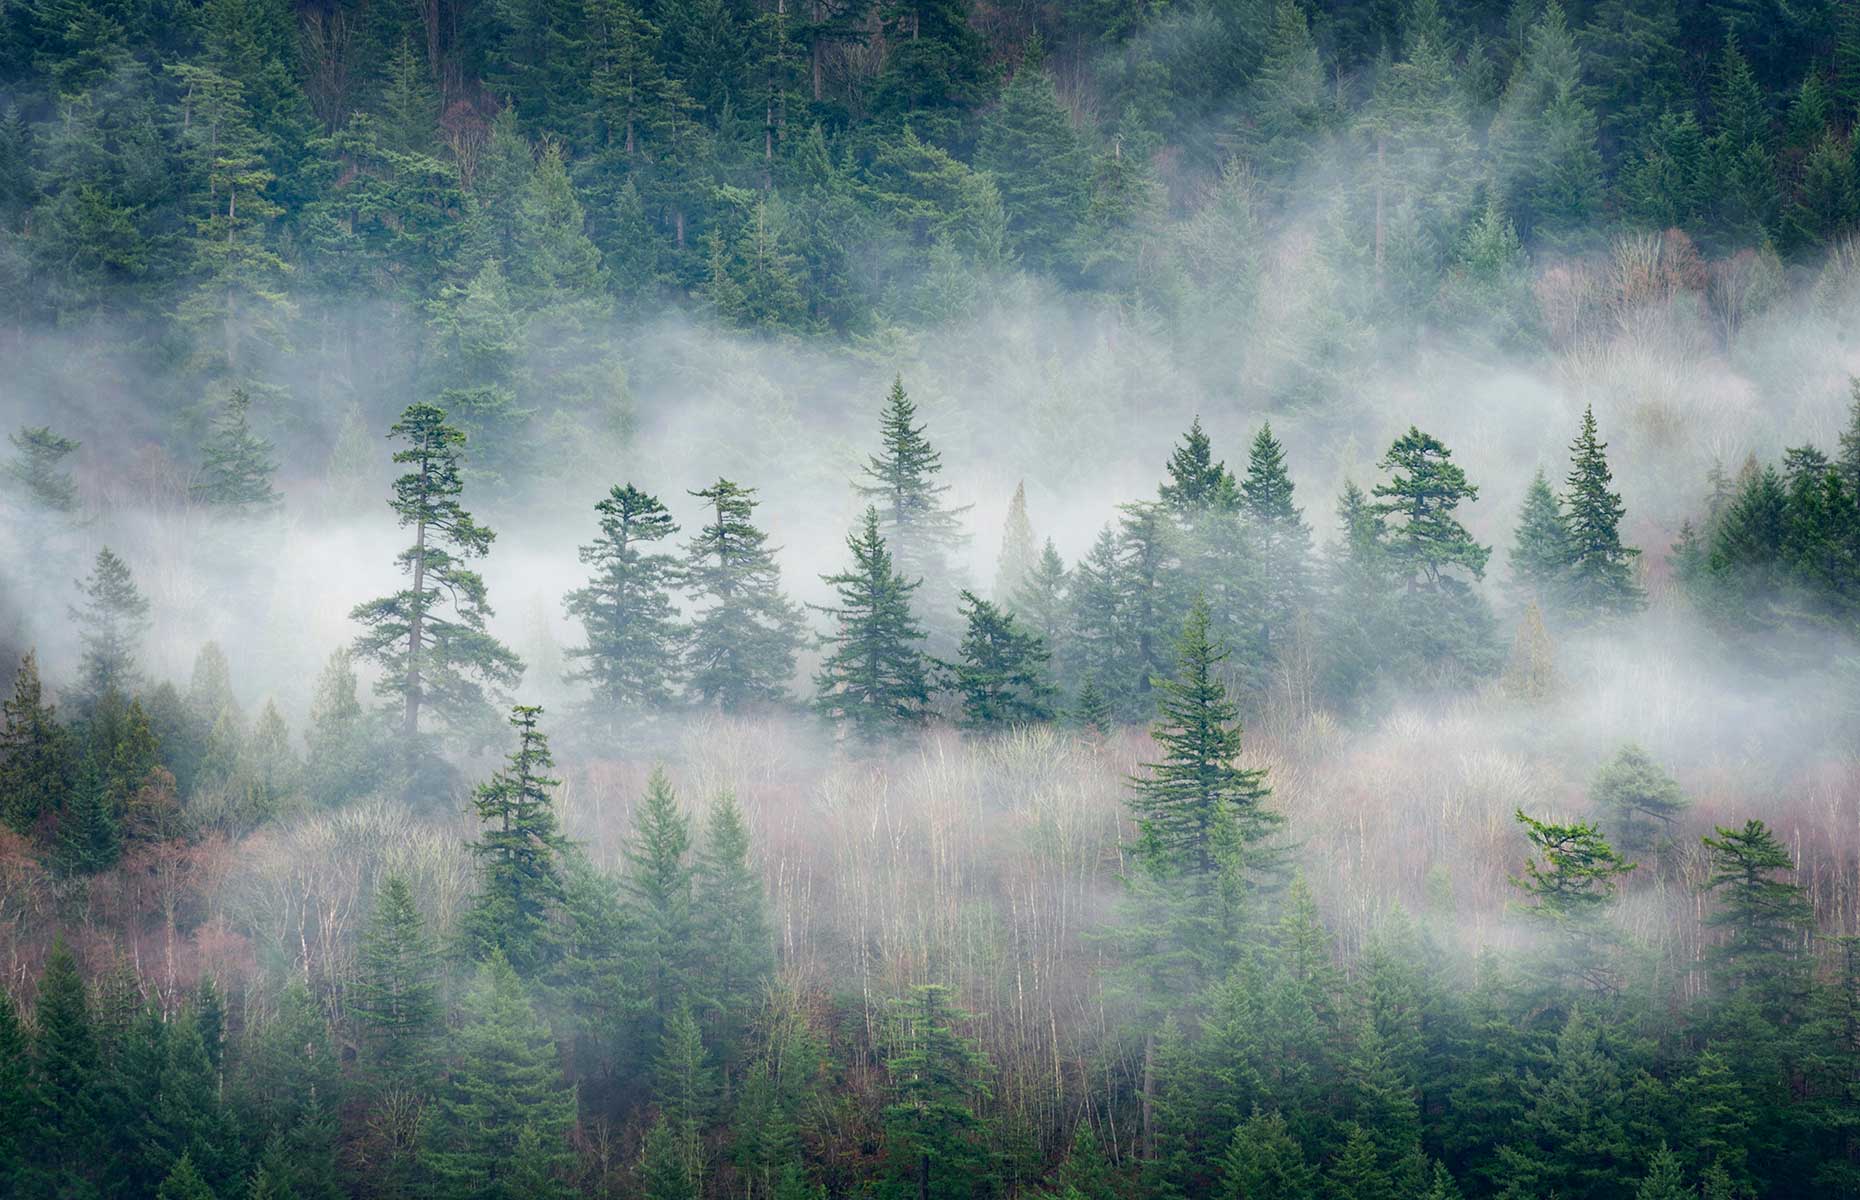 Misty forest in Harrison Hot Springs (Image: Edmund Lowe Photography/Shutterstock)